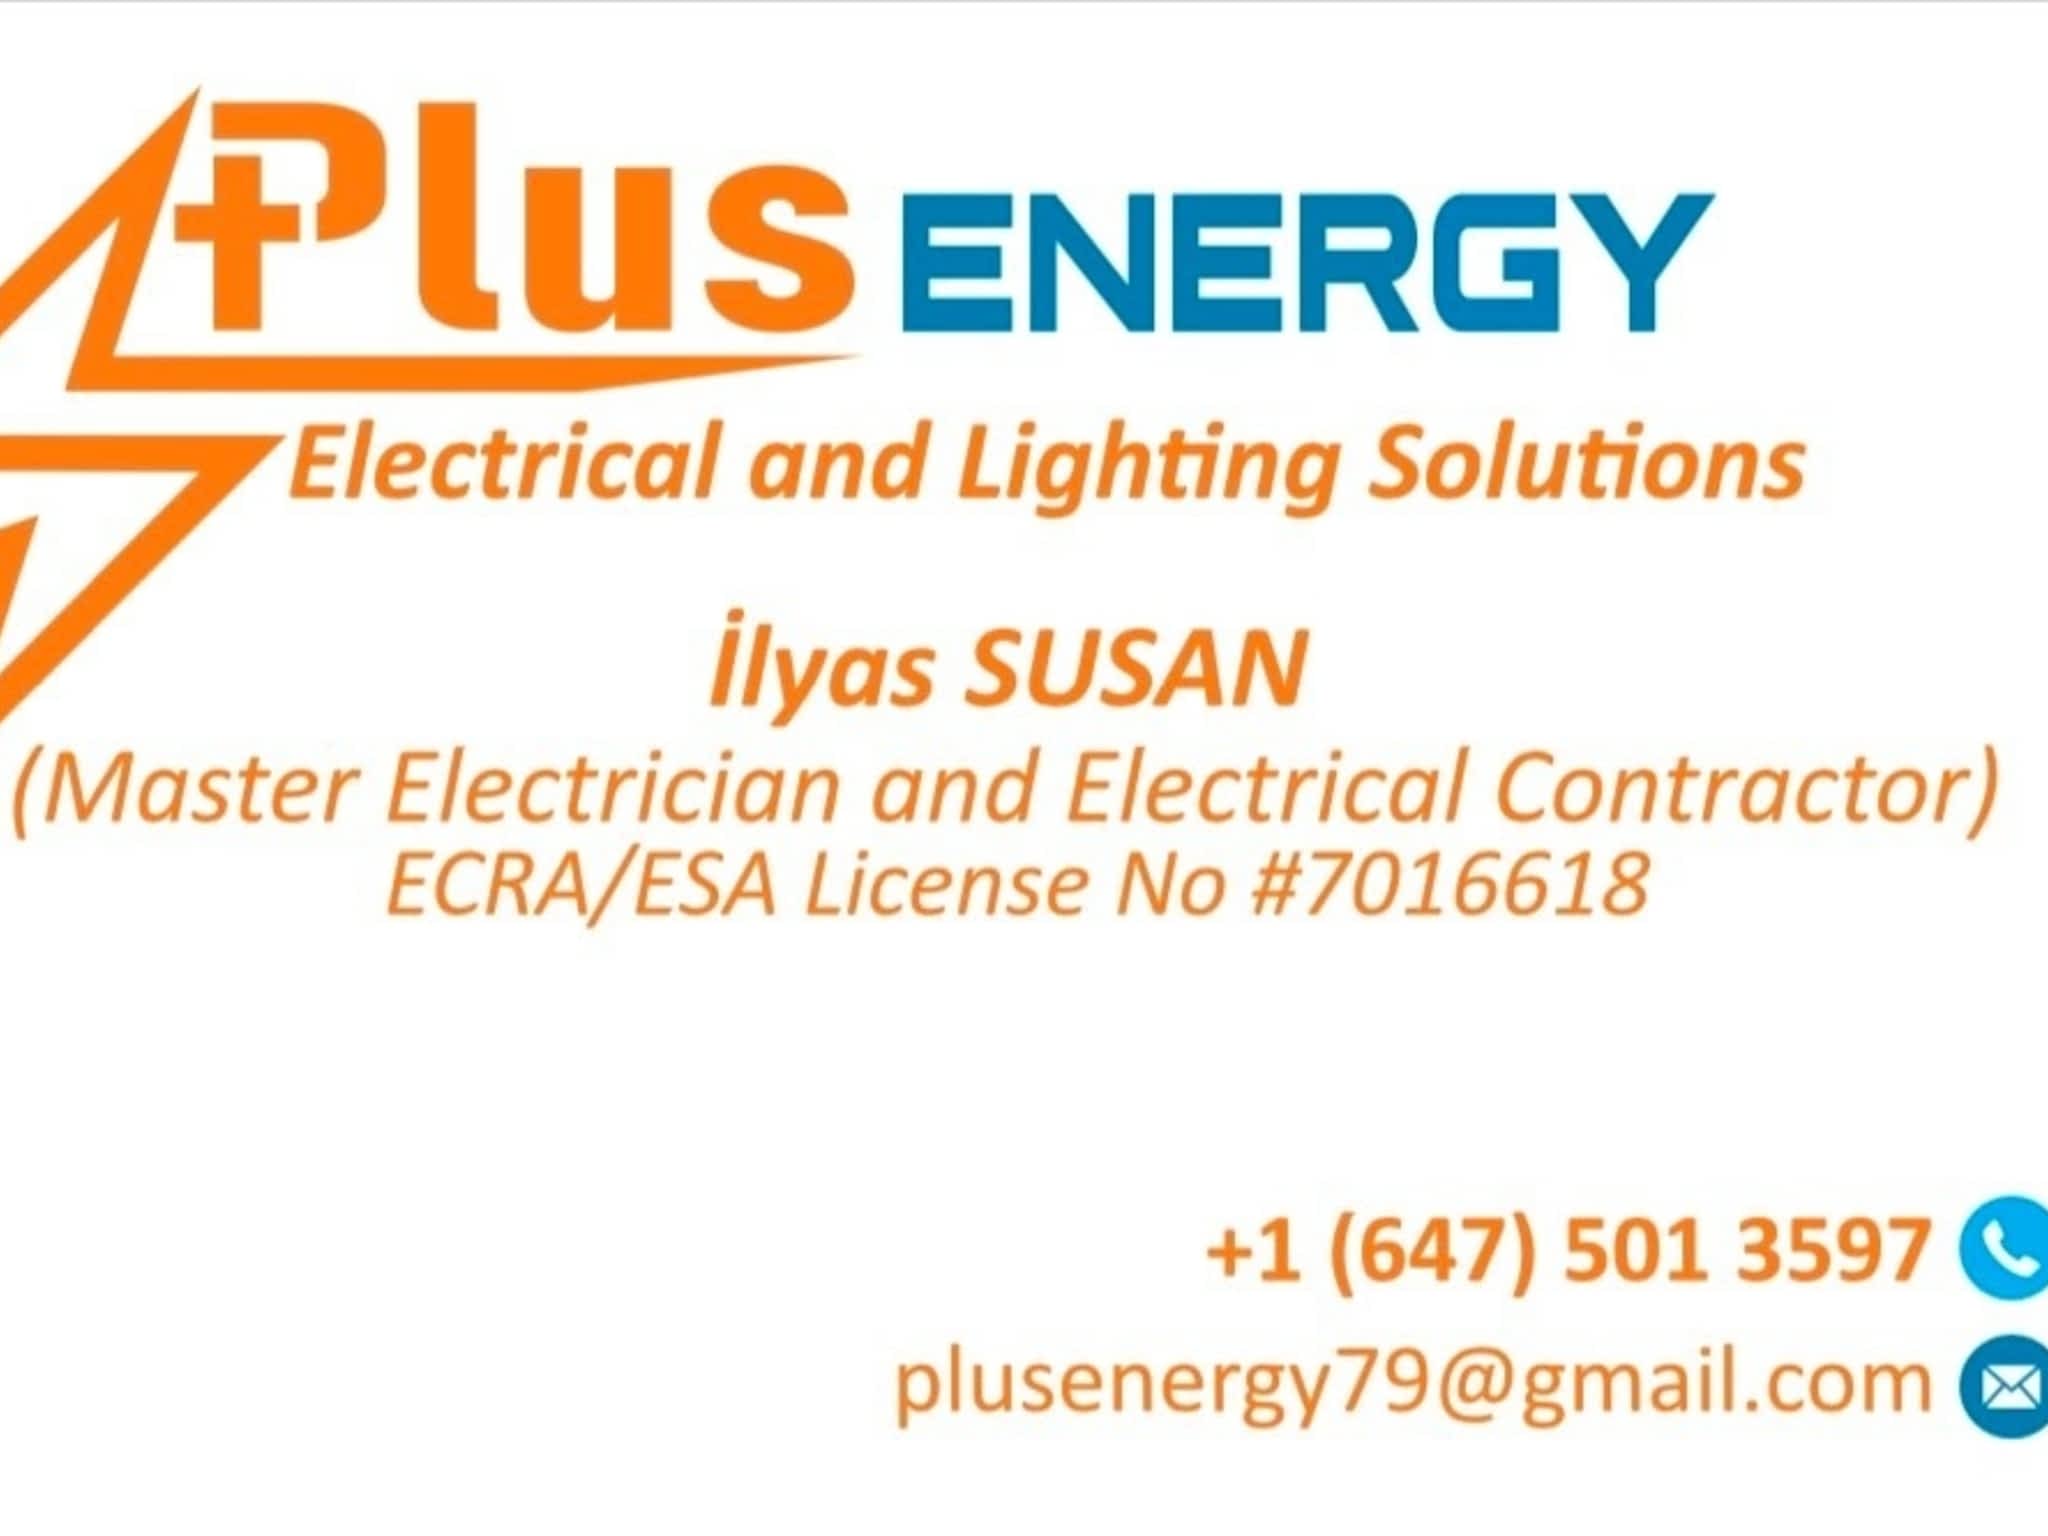 photo Plus Energy Electrical & Lighting Solutions